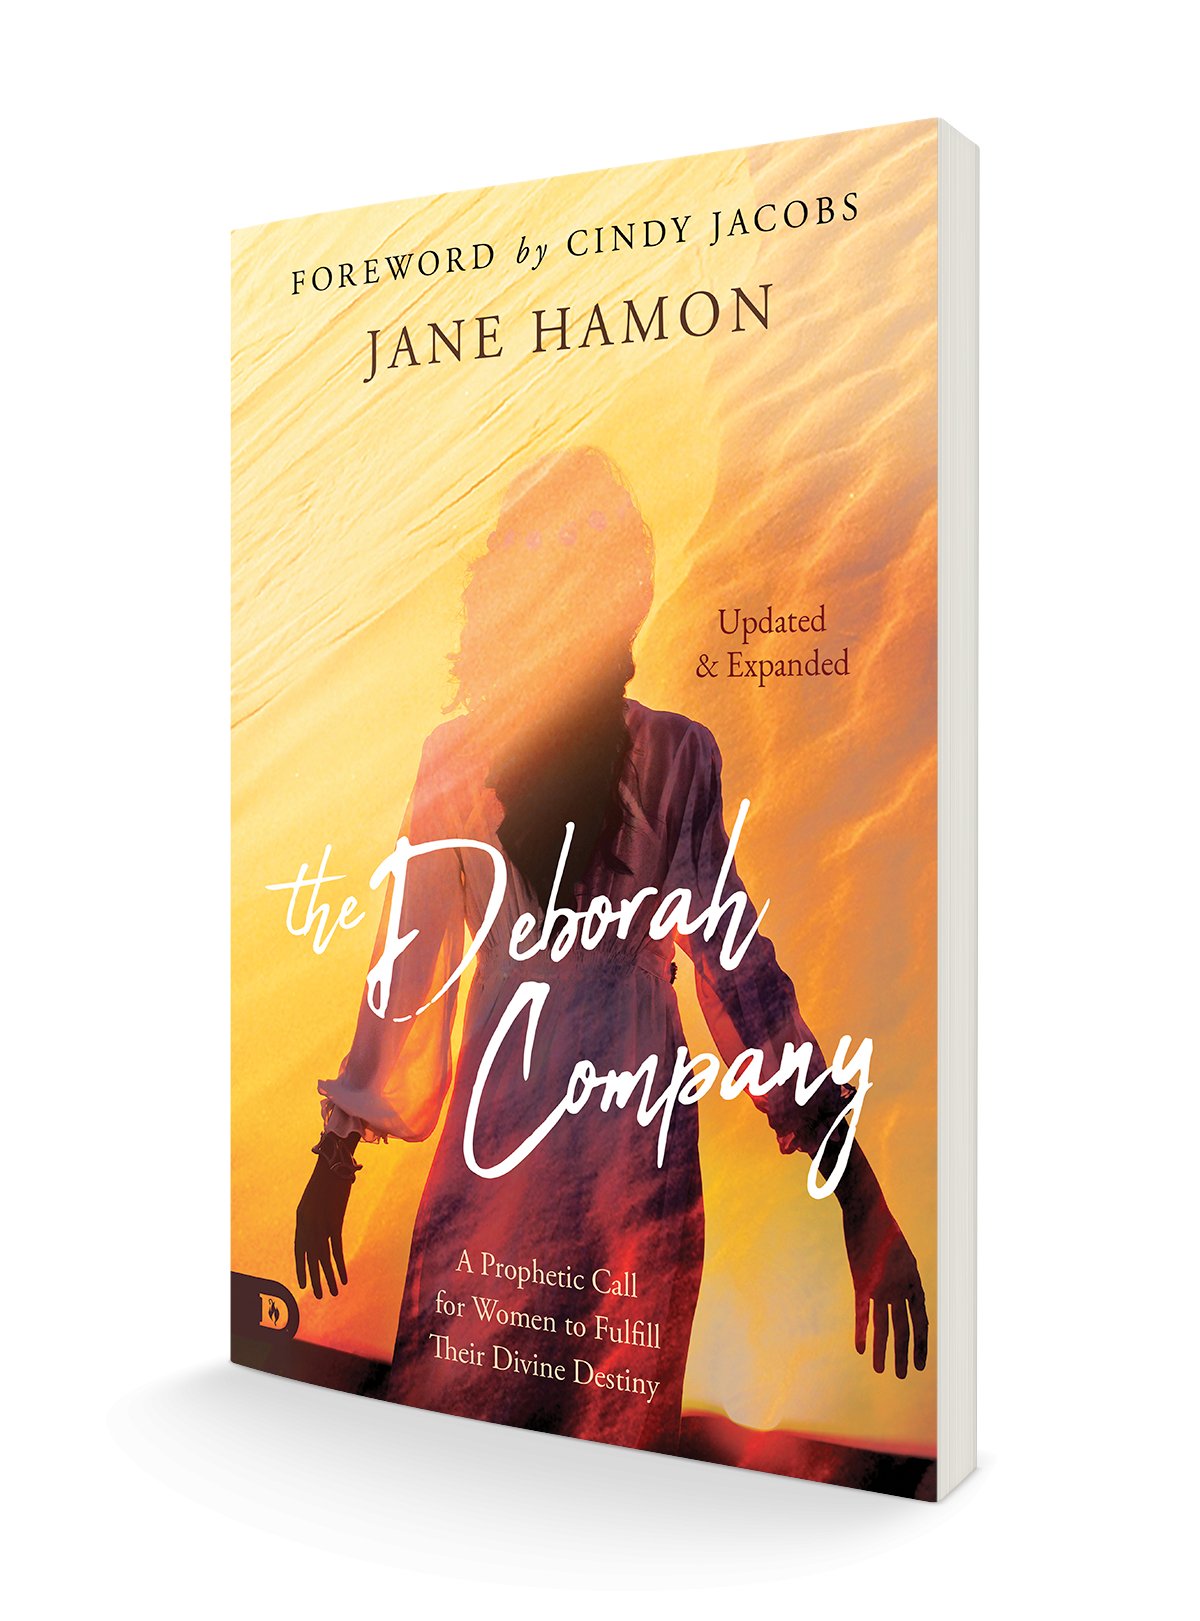 The Deborah Company (Updated and Expanded): A Prophetic Call for Women to Fulfill Their Divine Destiny Paperback – February 15, 2022 by Jane Hamon (Author) - Faith & Flame - Books and Gifts - Destiny Image - 9780768461176